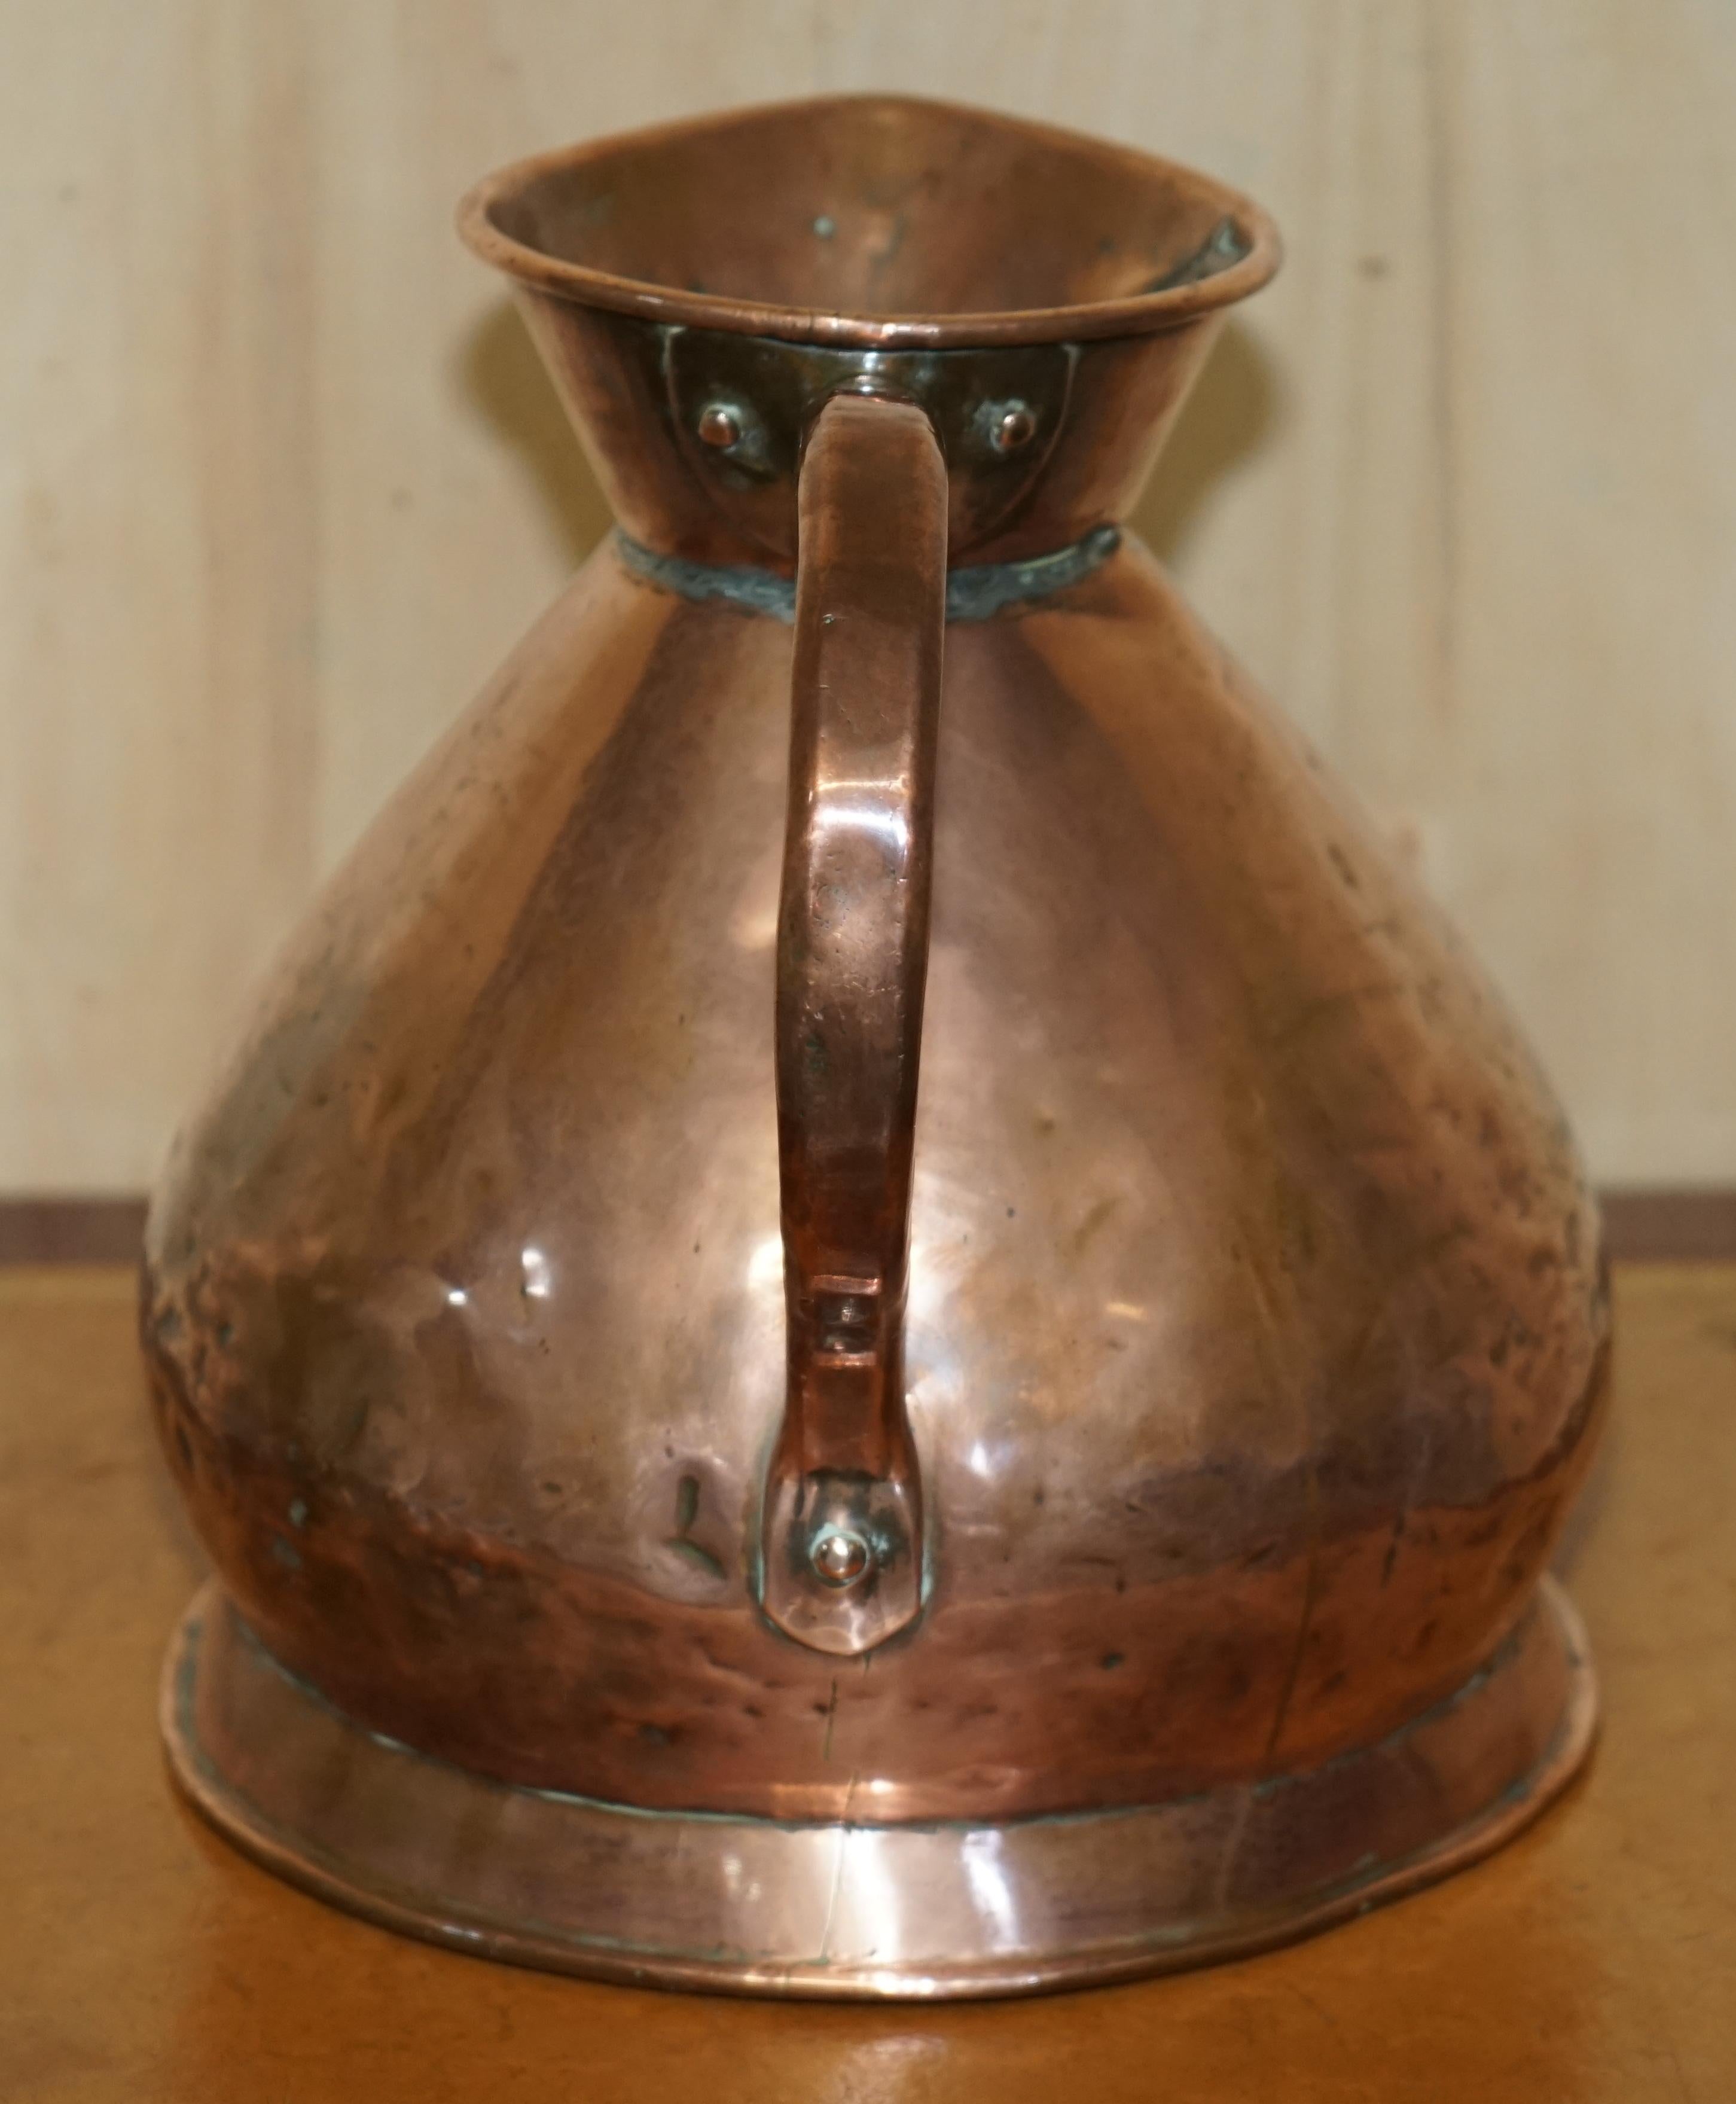 We are delighted to offer for sale this stunning original circa 1860-1880 Victorian Copper & Brass 2 Gallon Pitcher jug.

I have two of these, the second jug is an earlier Georgian example and is listed under my other items.

The jug has all the